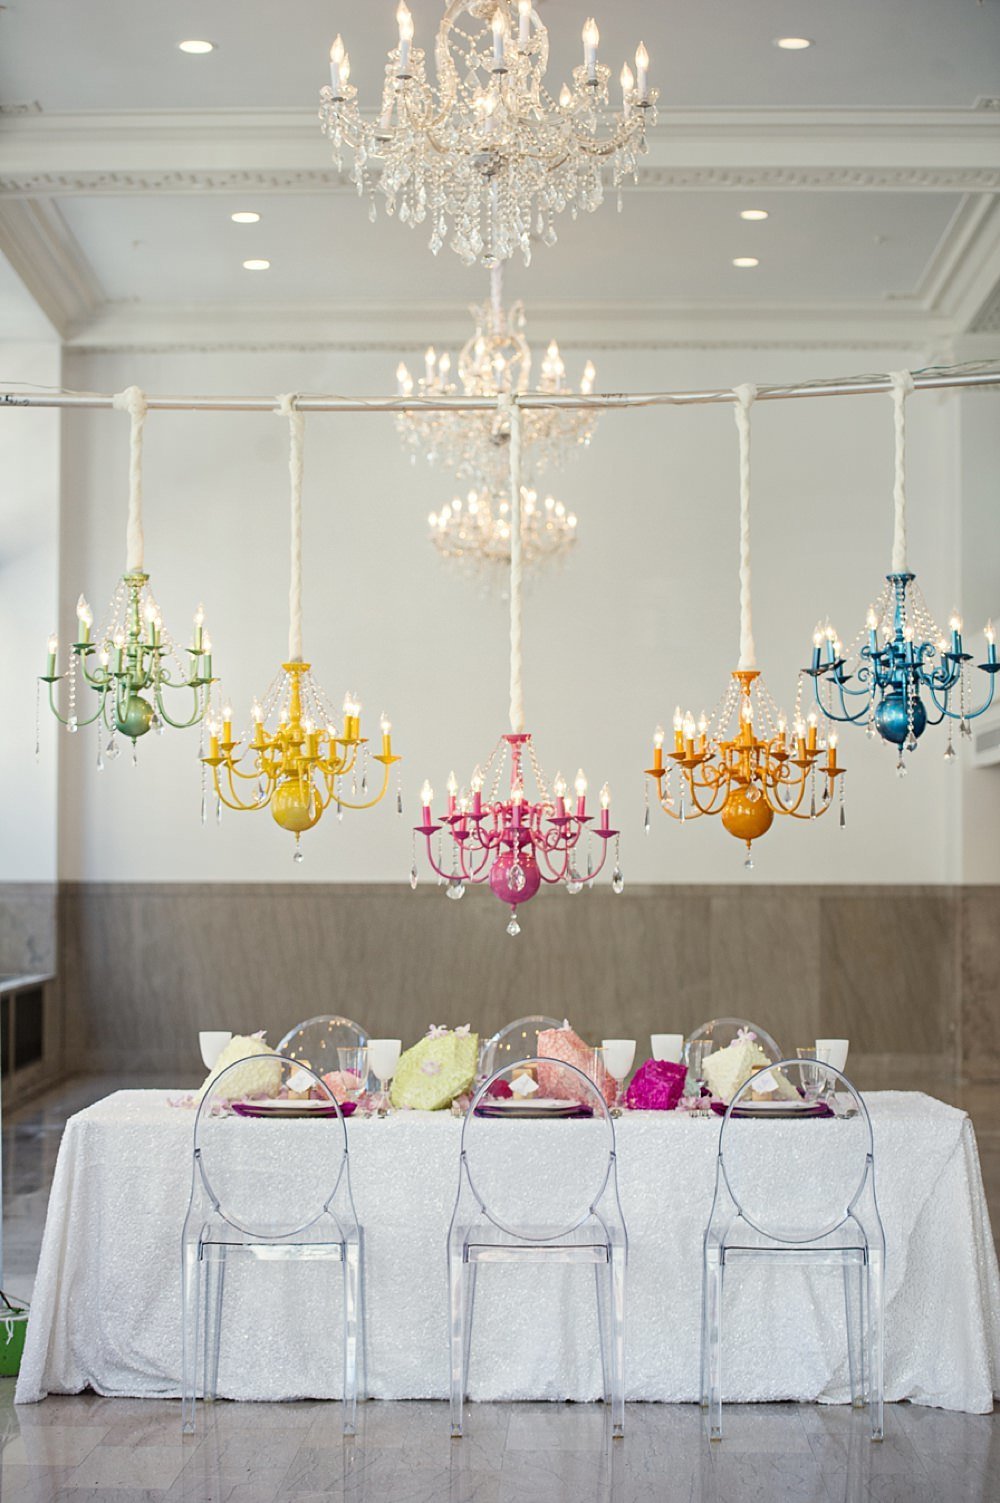 Colorful party tablescape with chandeliers